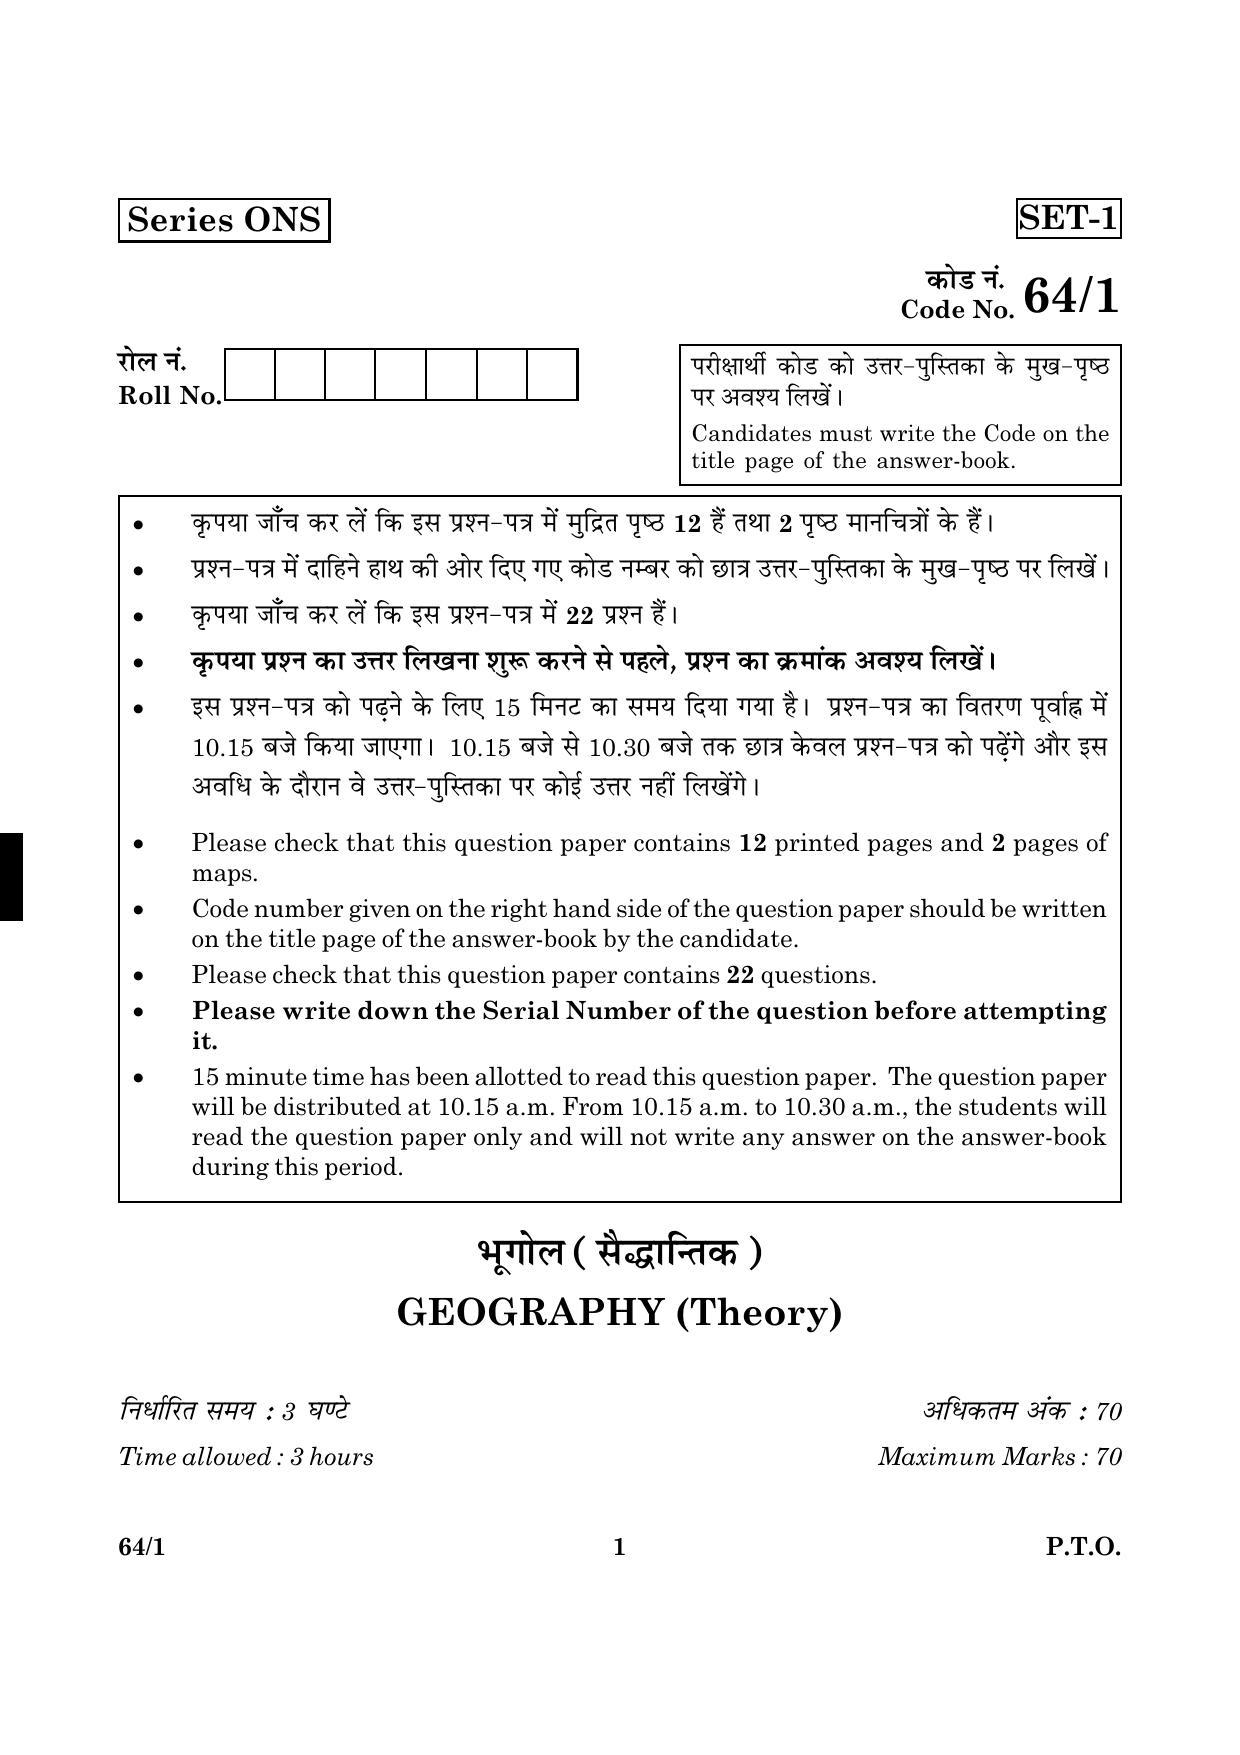 CBSE Class 12 064 Set 1 Geography 2016 Question Paper - Page 1